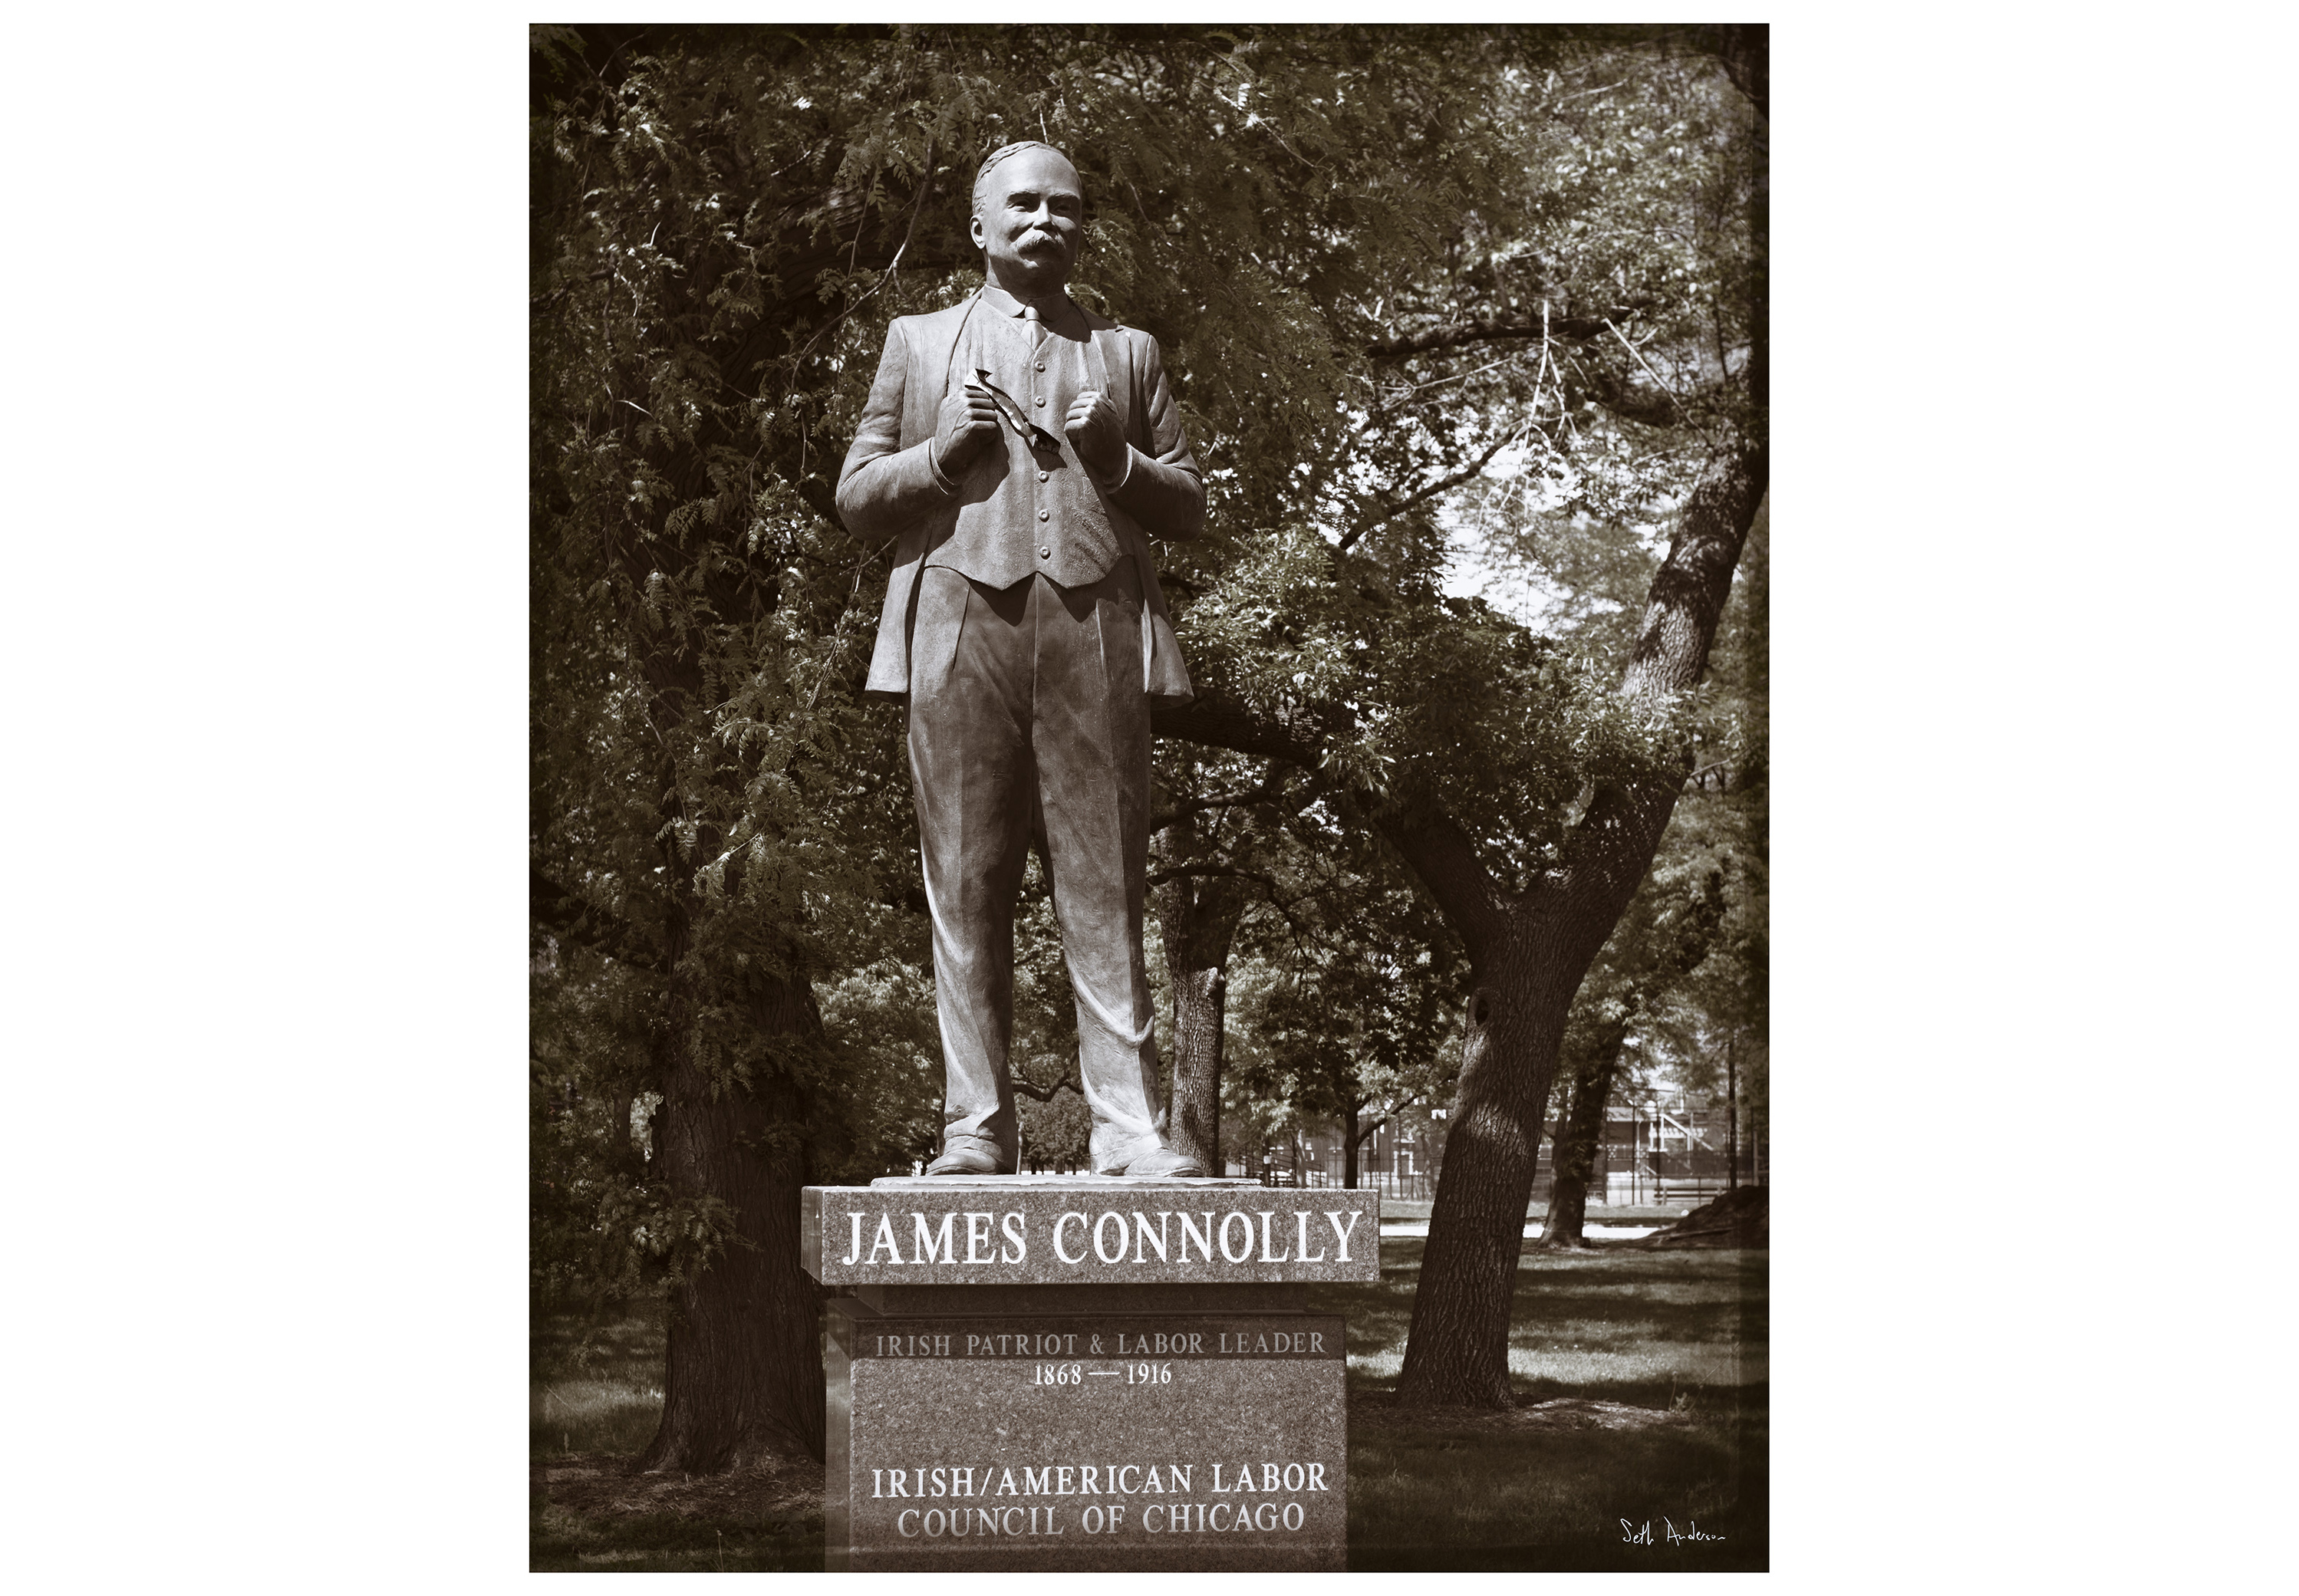 The James Connolly Monument in Chicago’s Union Park.  